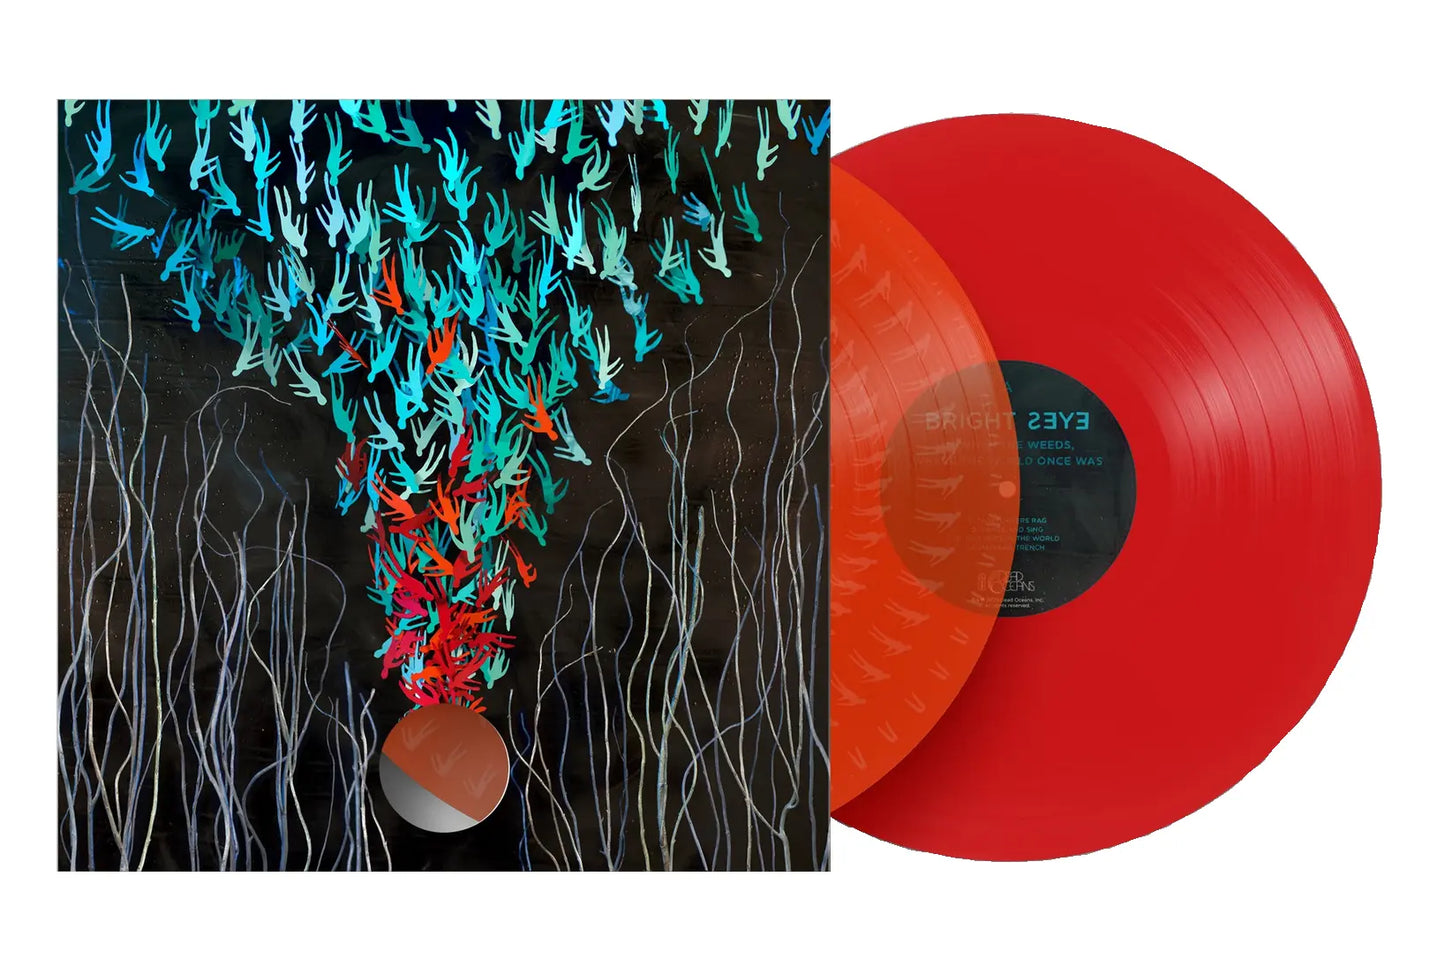 Bright Eyes' "Down In The Weeds, Where The World Once Was" Album On Orange And Red Vinyl LP Records